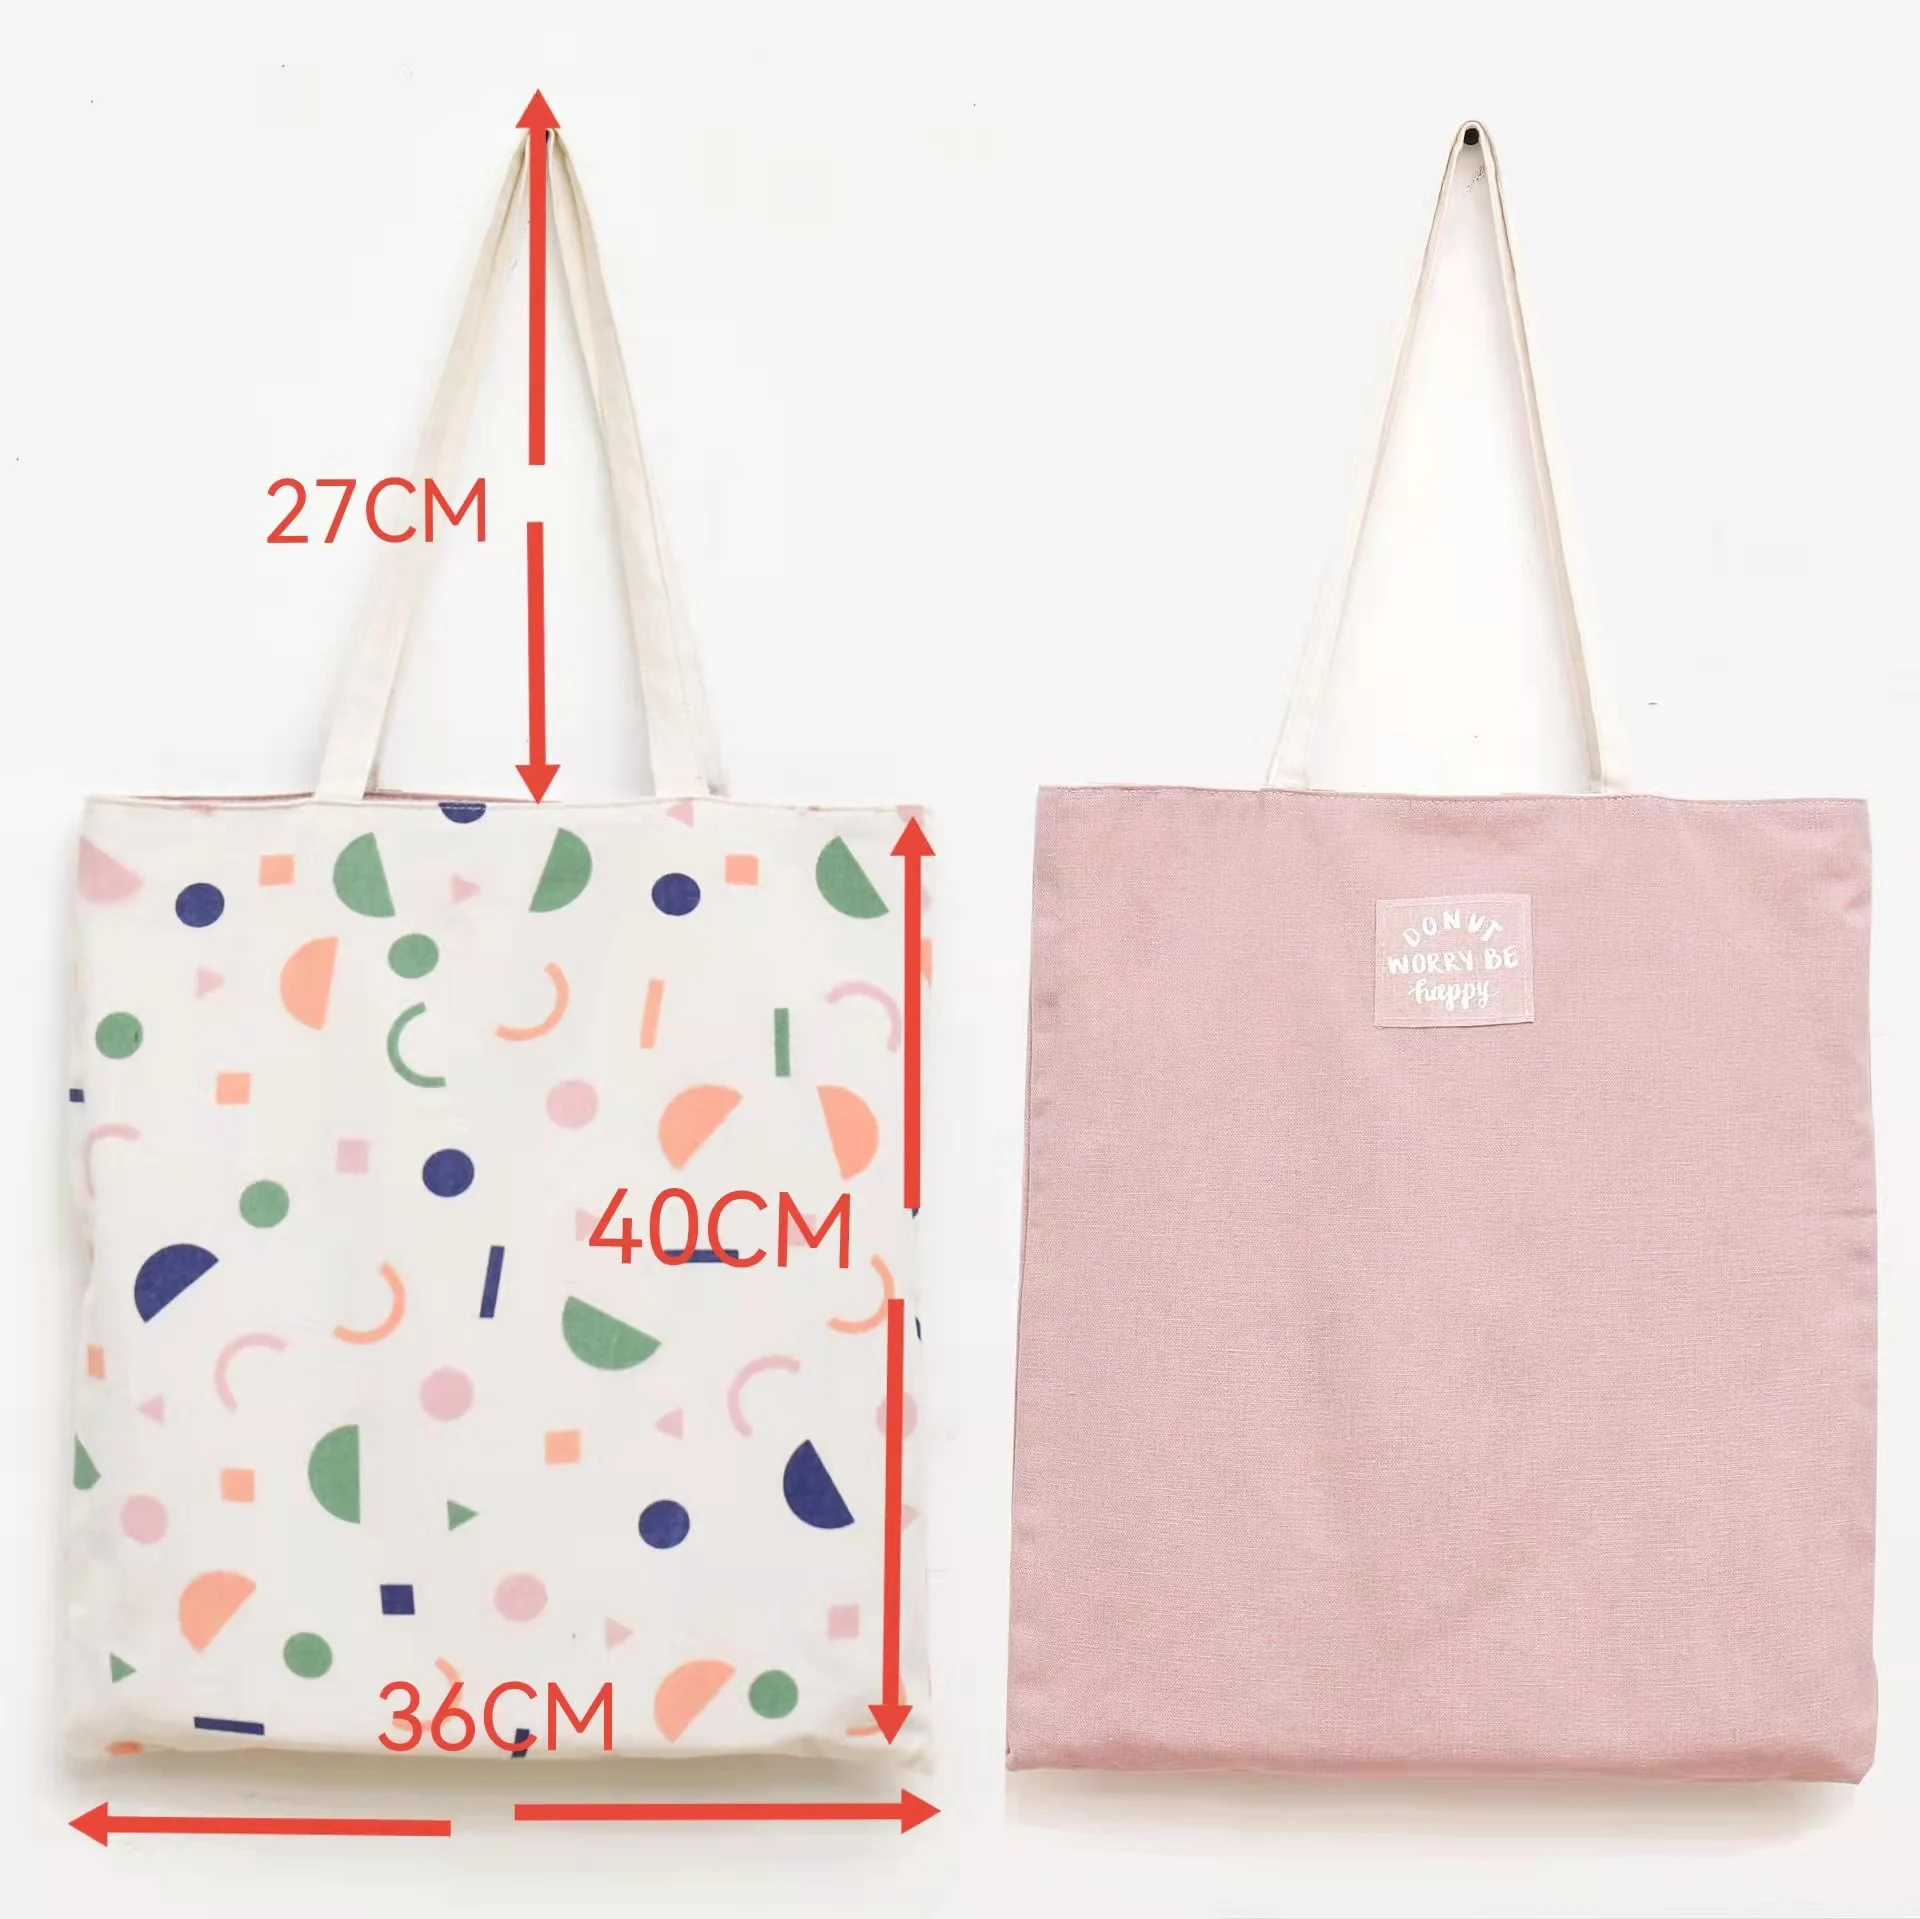 Hot Selling Double-sided Foldable Cotton and Linen Canvas Shoulder Bags Shopping Bag Storage Bags